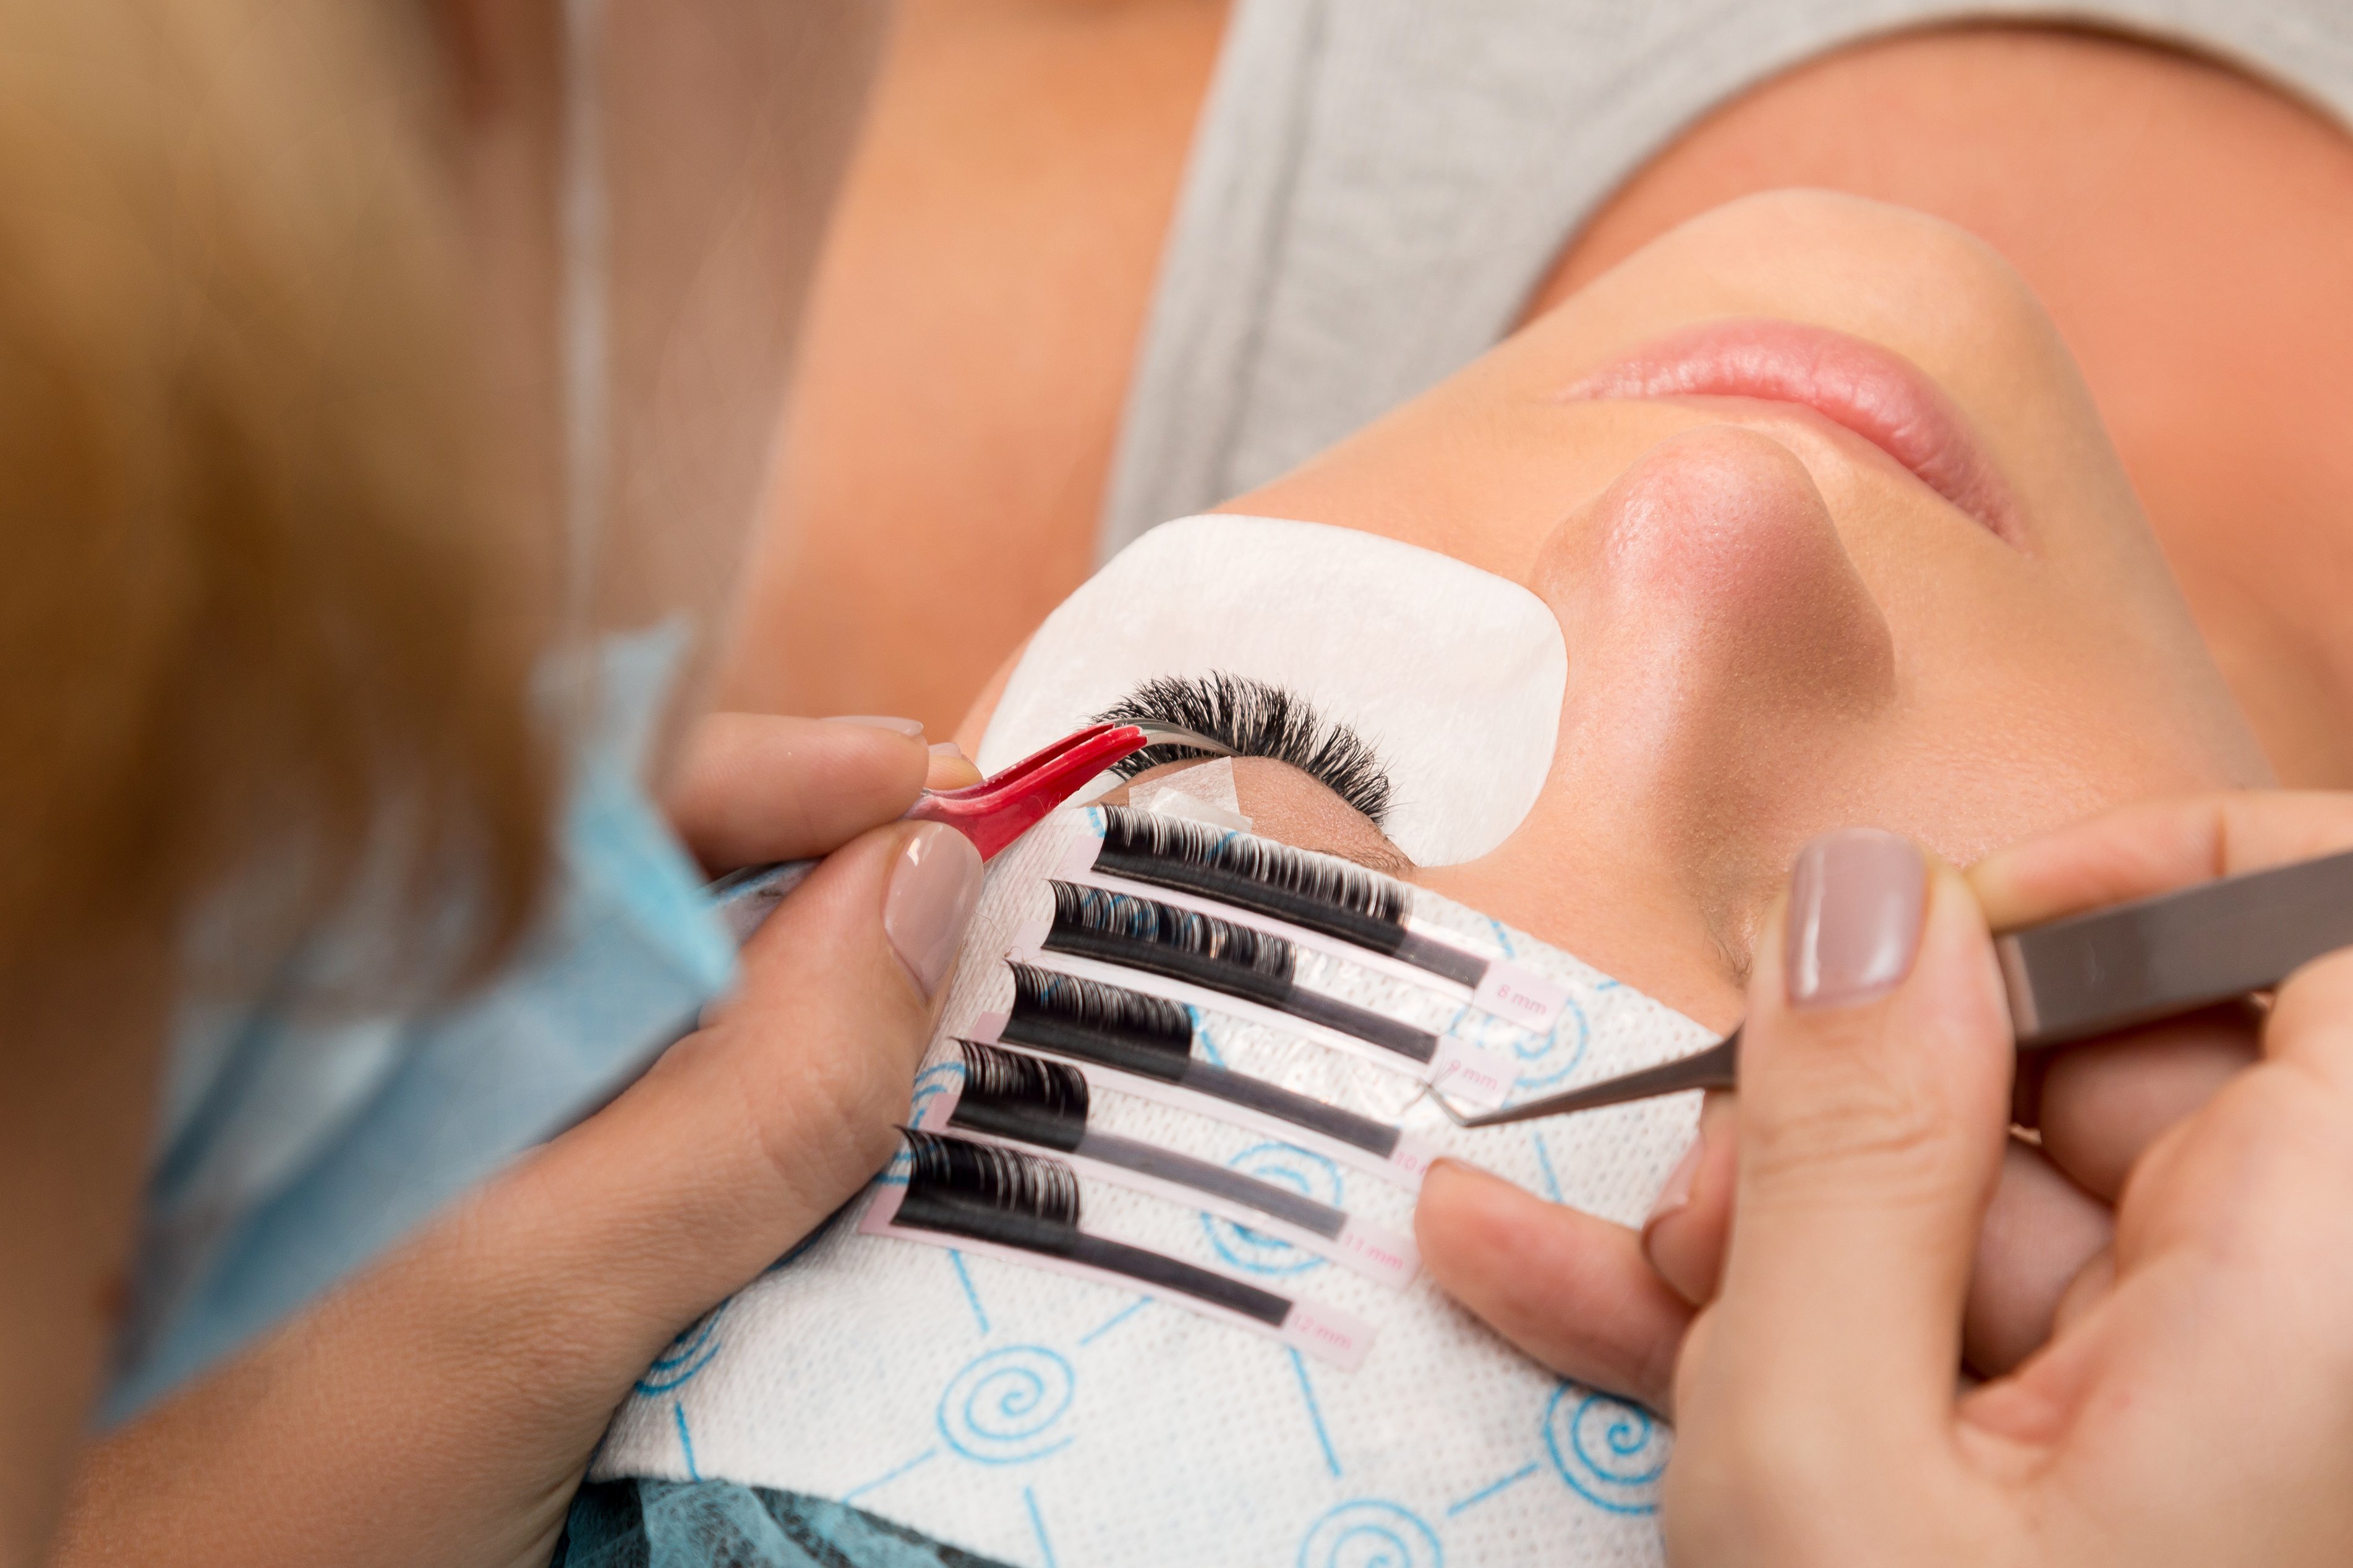 The installation process for individual lash extensions | Source: Getty Images